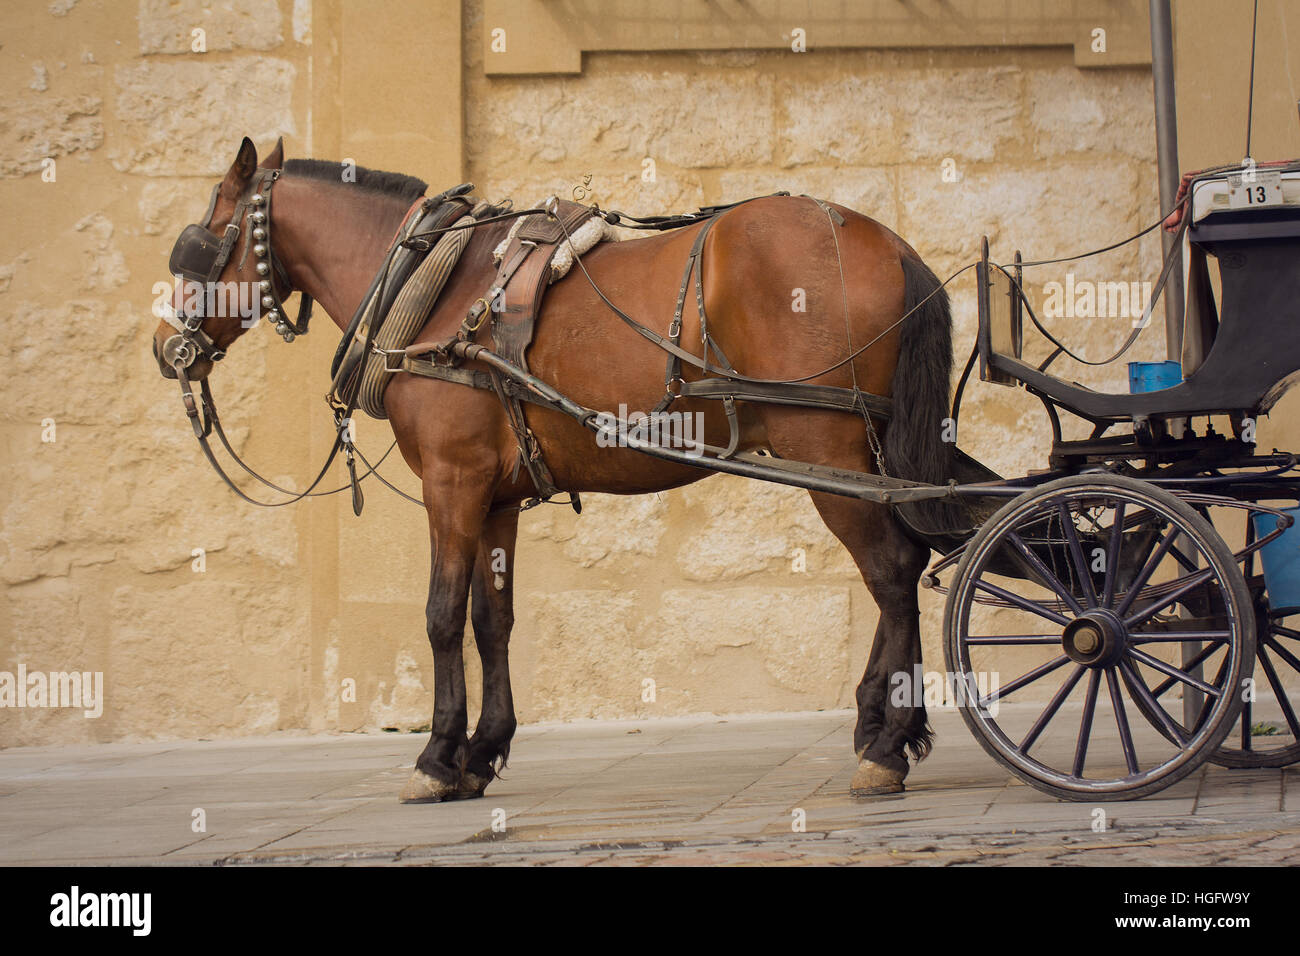 horse in carriage in town Stock Photo